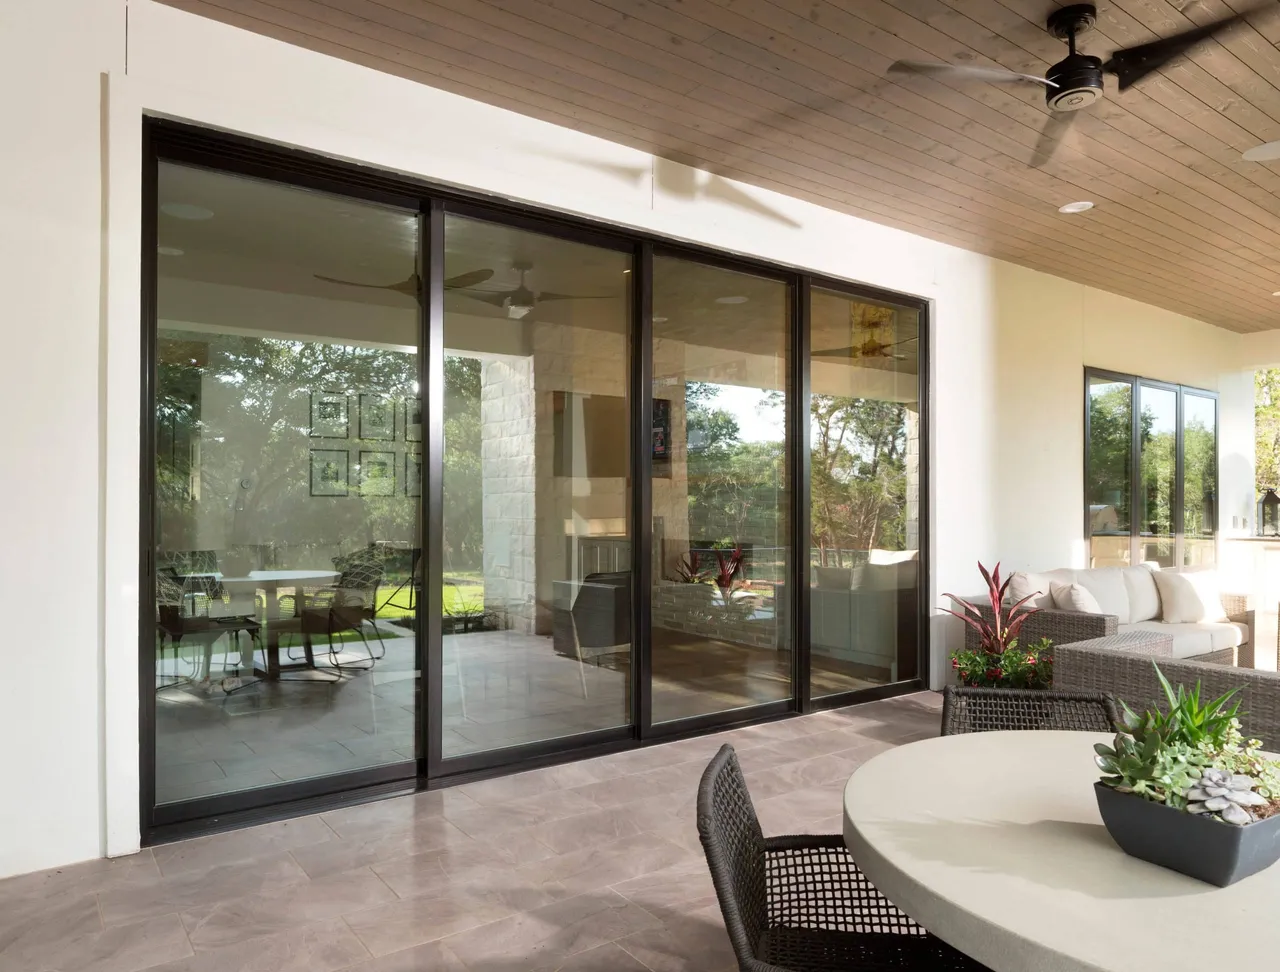 HOW PATIO DOORS CAN MAKE OR BREAK A LIVING SPACE